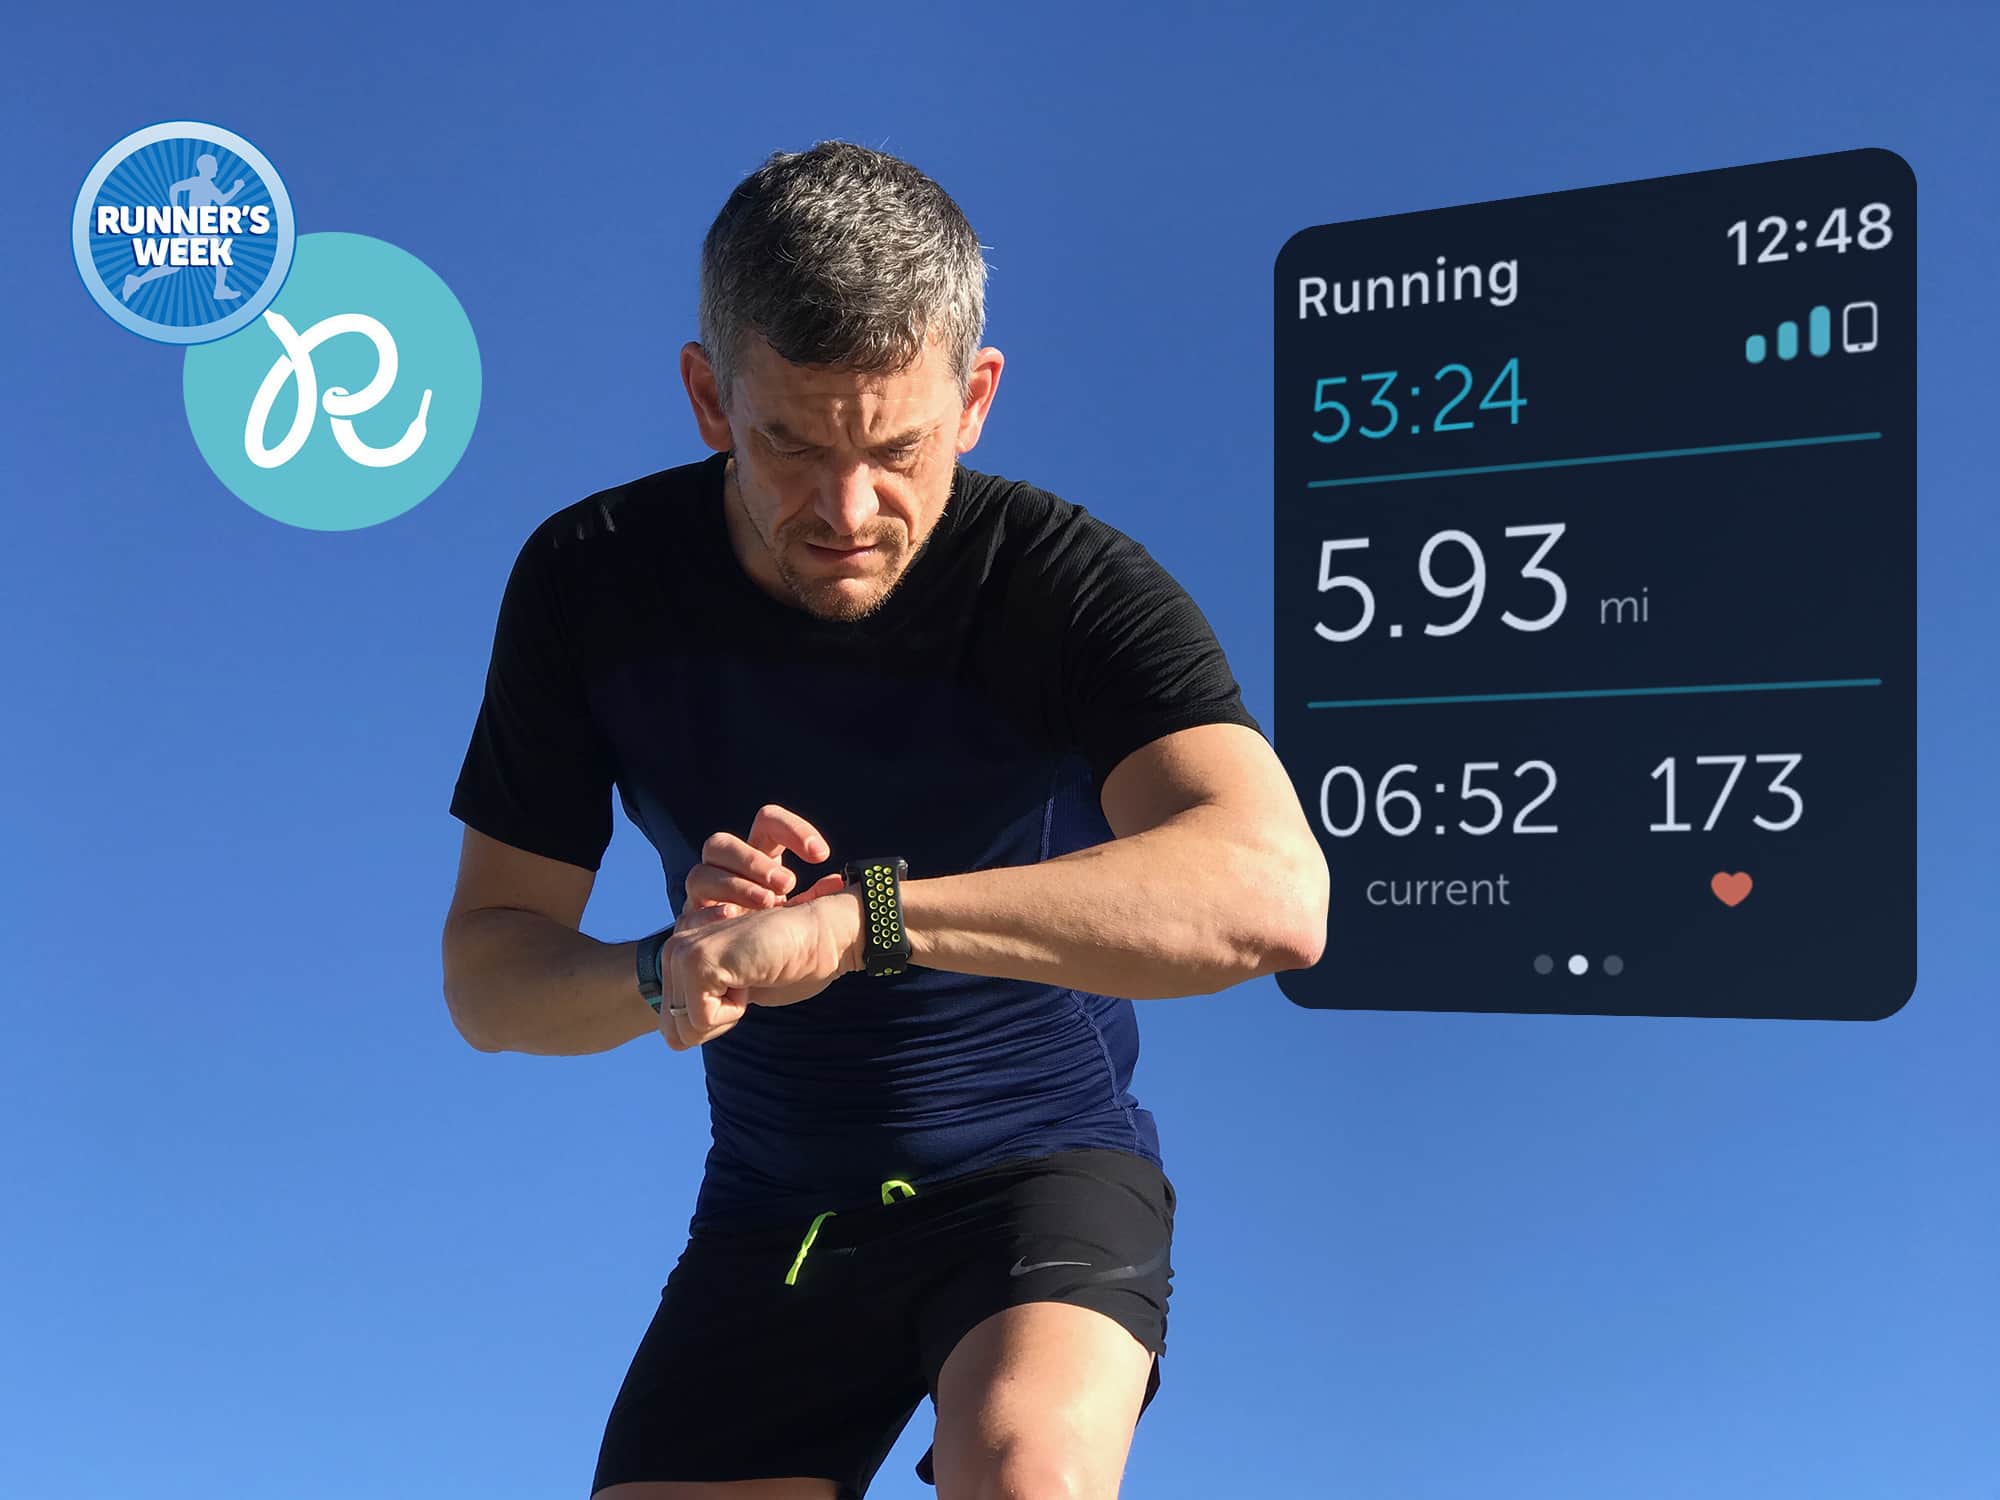 Fortress head teacher punch Runkeeper app brings innovation and minor glitches [Runner's Week: Day -  Cult of Mac Store